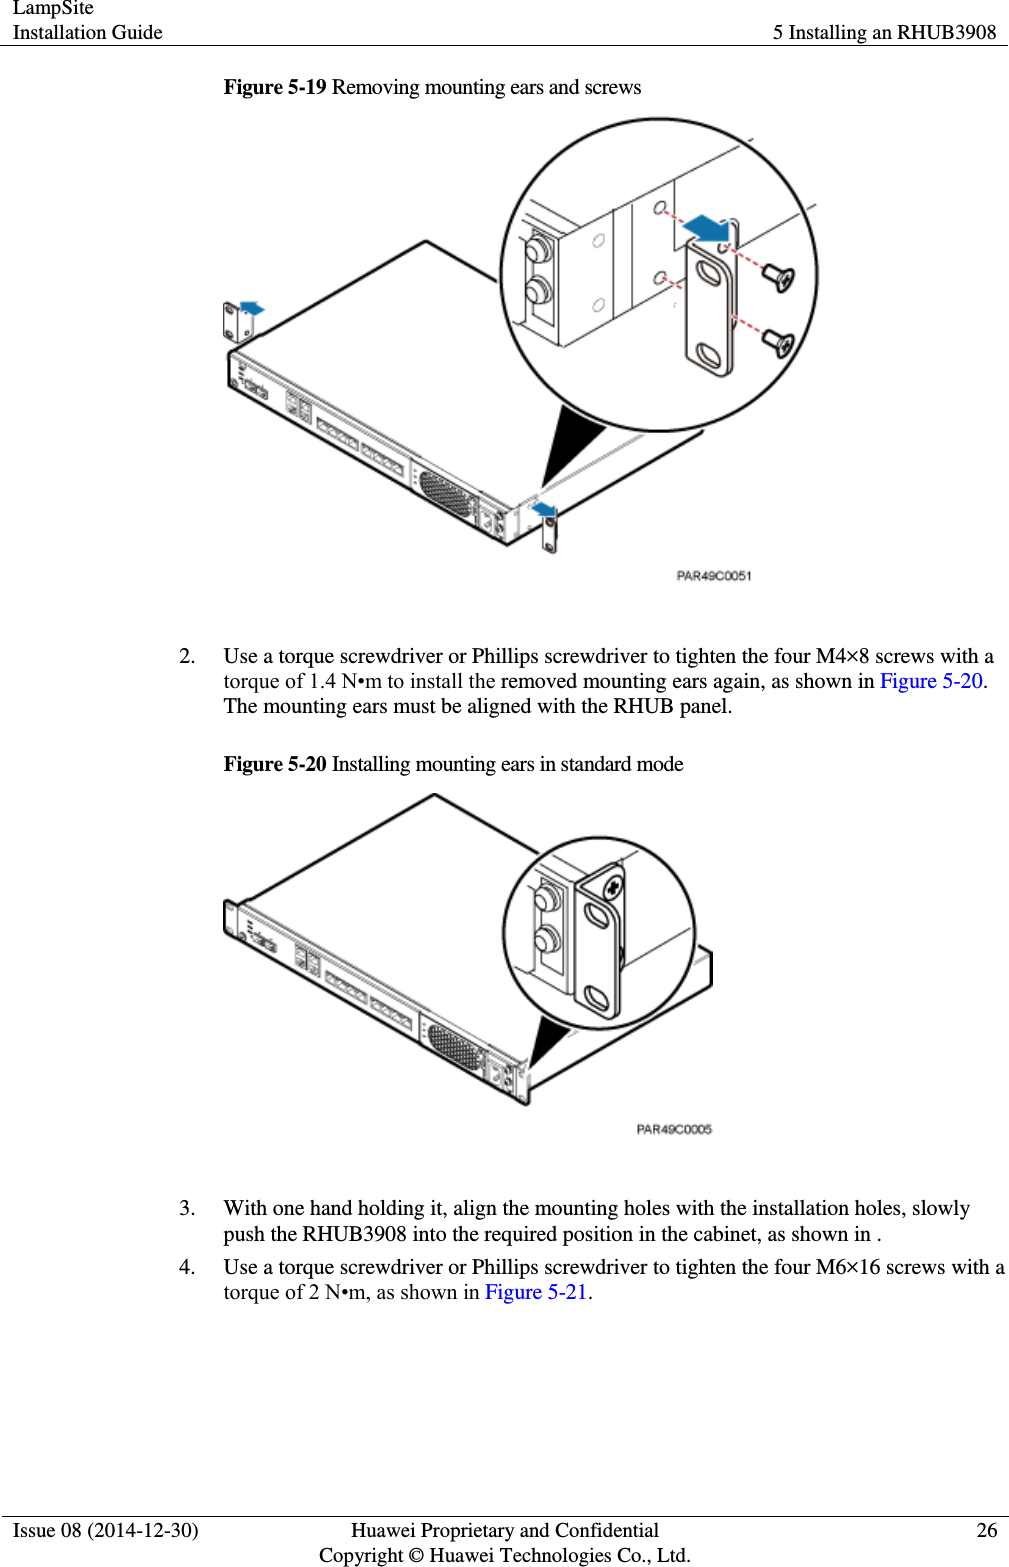 LampSite Installation Guide 5 Installing an RHUB3908  Issue 08 (2014-12-30) Huawei Proprietary and Confidential                                     Copyright © Huawei Technologies Co., Ltd. 26  Figure 5-19 Removing mounting ears and screws   2. Use a torque screwdriver or Phillips screwdriver to tighten the four M4×8 screws with a torque of 1.4 N•m to install the removed mounting ears again, as shown in Figure 5-20. The mounting ears must be aligned with the RHUB panel.   Figure 5-20 Installing mounting ears in standard mode   3. With one hand holding it, align the mounting holes with the installation holes, slowly push the RHUB3908 into the required position in the cabinet, as shown in .   4. Use a torque screwdriver or Phillips screwdriver to tighten the four M6×16 screws with a torque of 2 N•m, as shown in Figure 5-21.   